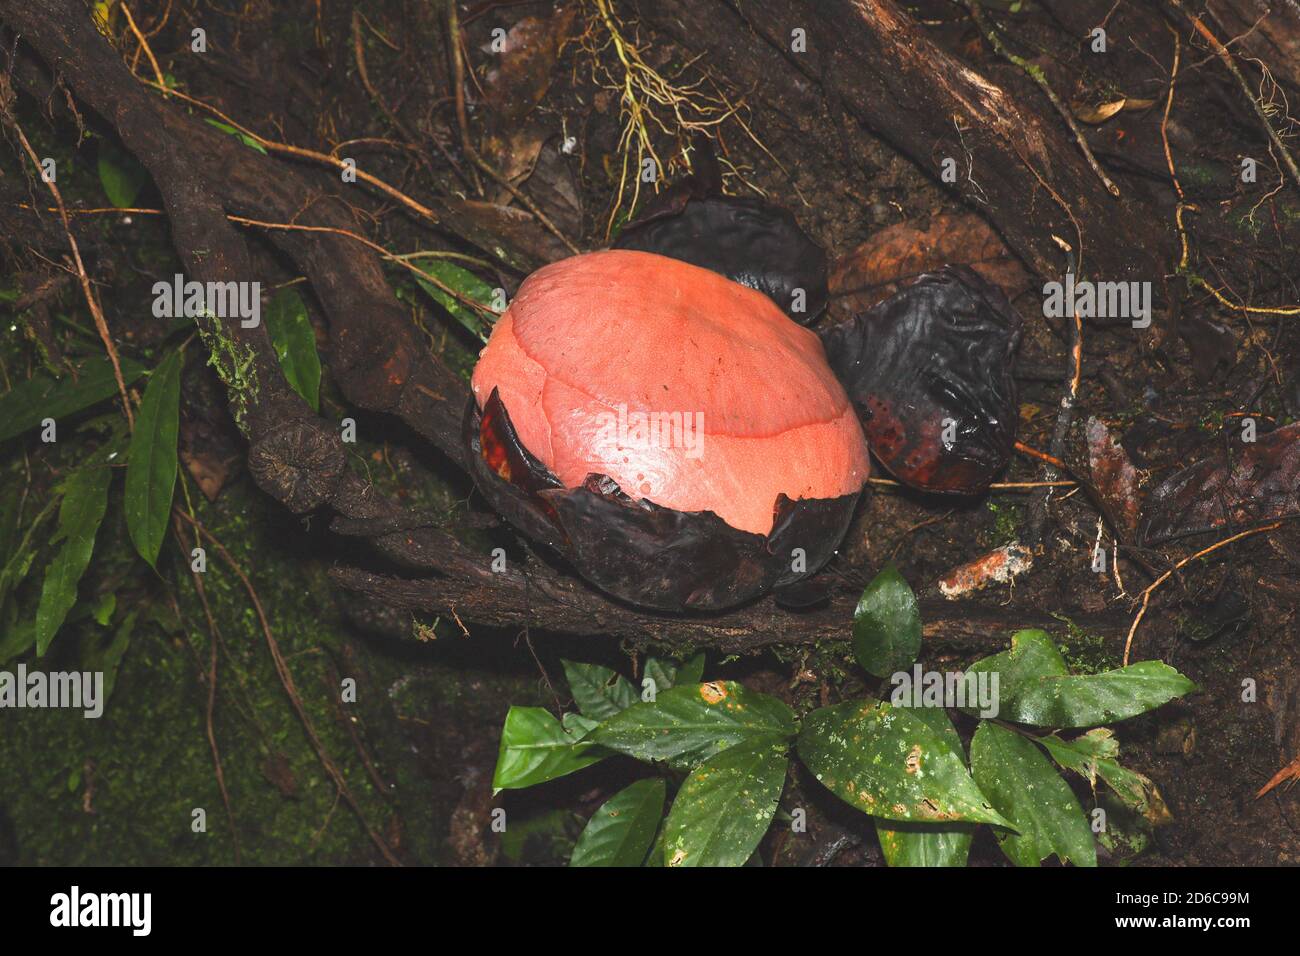 Bud of the Rafflesia kerrii from the rafflesia family, the largest flower in the world which is ready to bloom in another week. Stock Photo